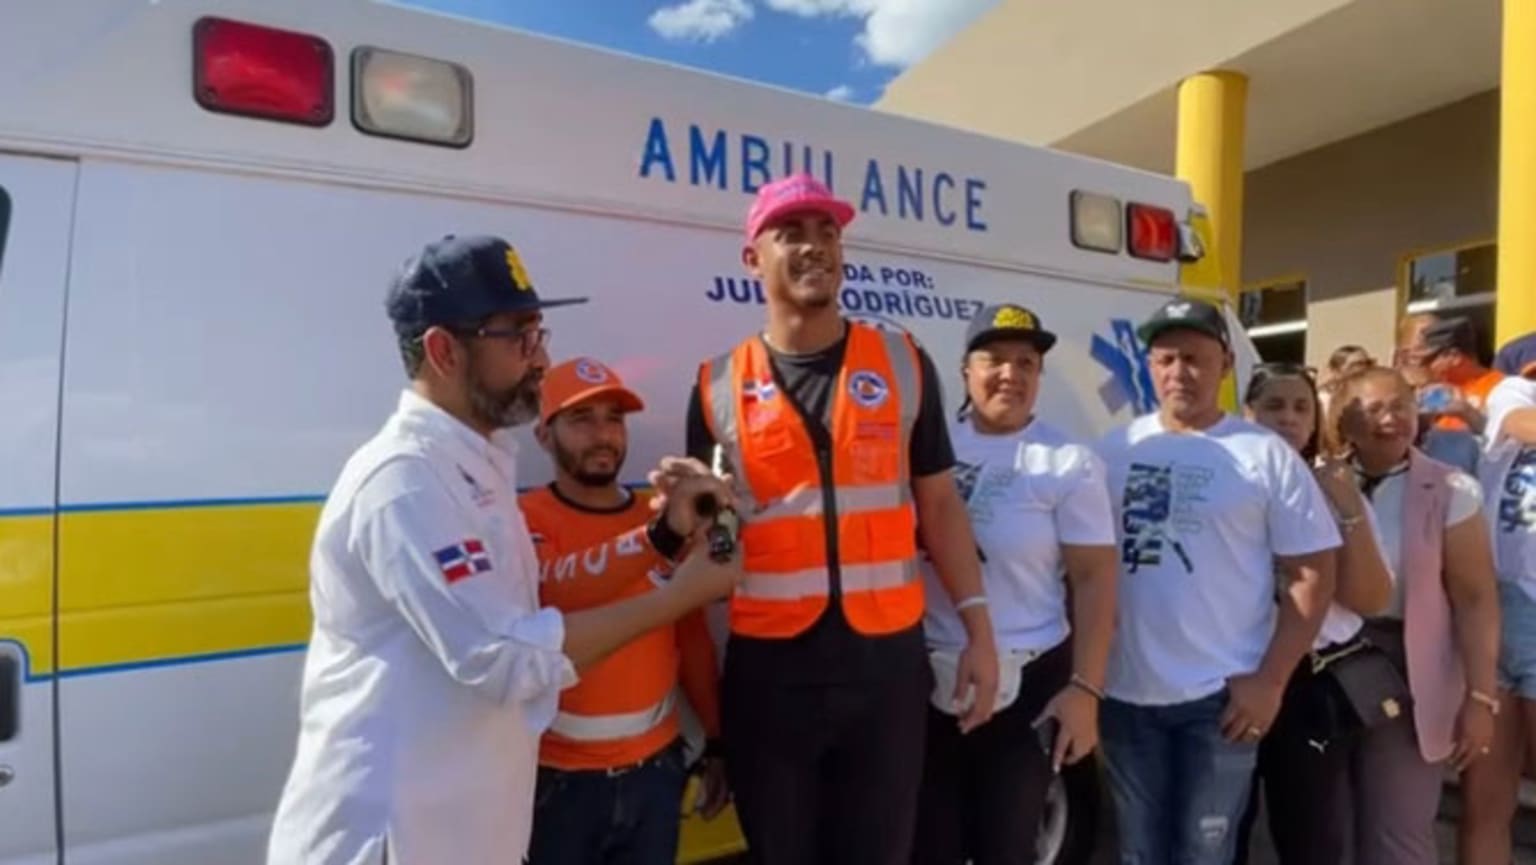 Julio Rodríguez poses with people in front of an ambulance